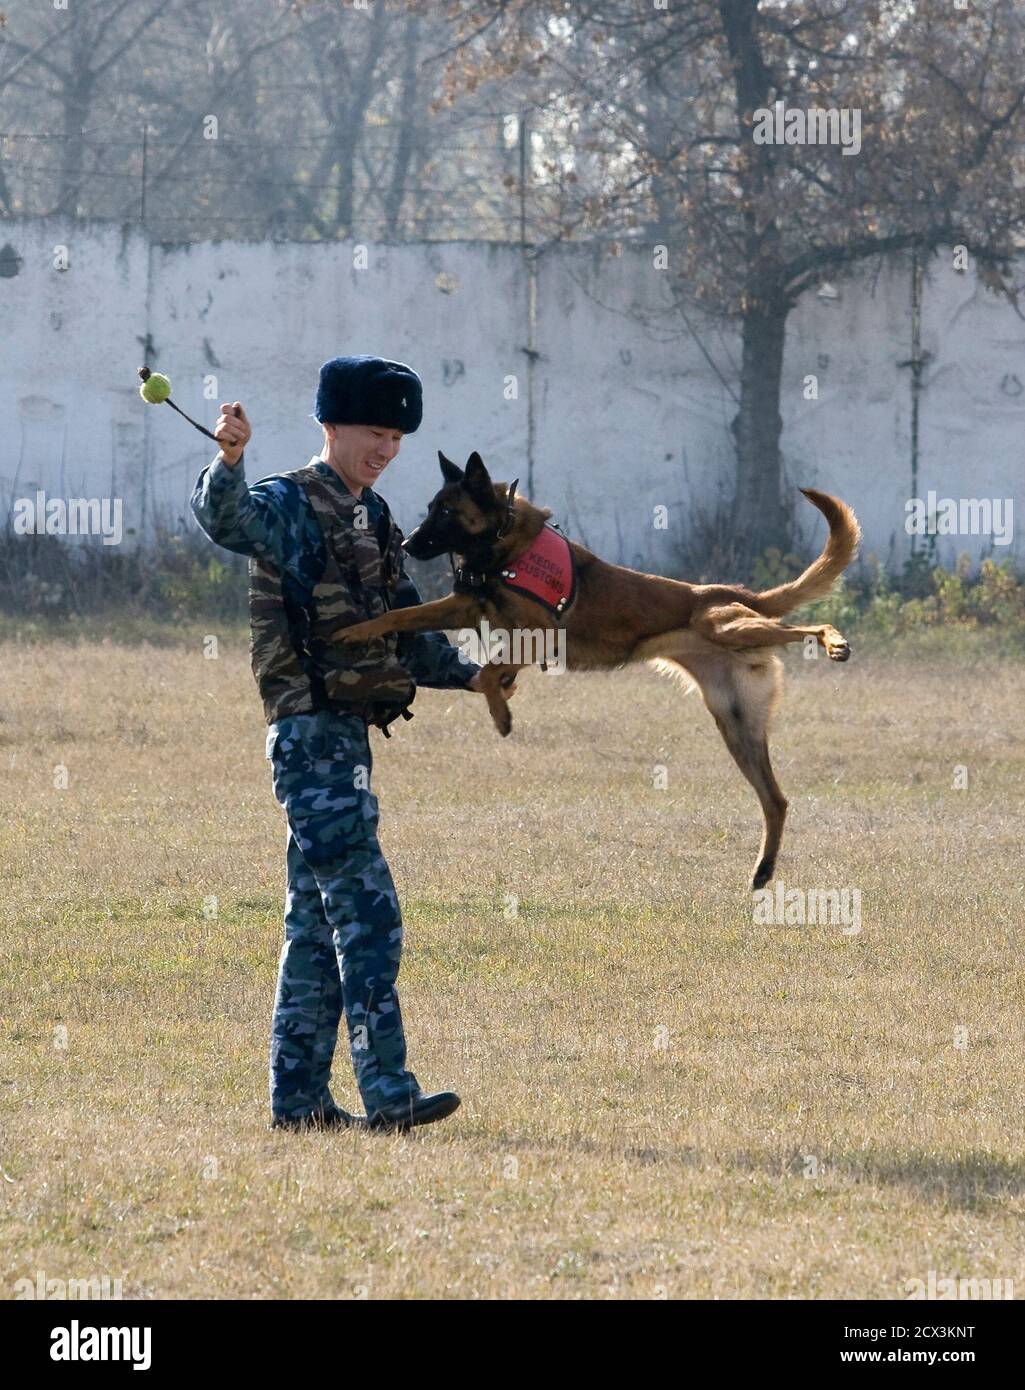 A dog handler trains the canine unit during exercises at a regional cynology centre of Kazakhstan's Customs Control Committee in Almaty November 15, 2010. REUTERS/Shamil Zhumatov  (KAZAKHSTAN - Tags: ANIMALS CRIME LAW) Stock Photo